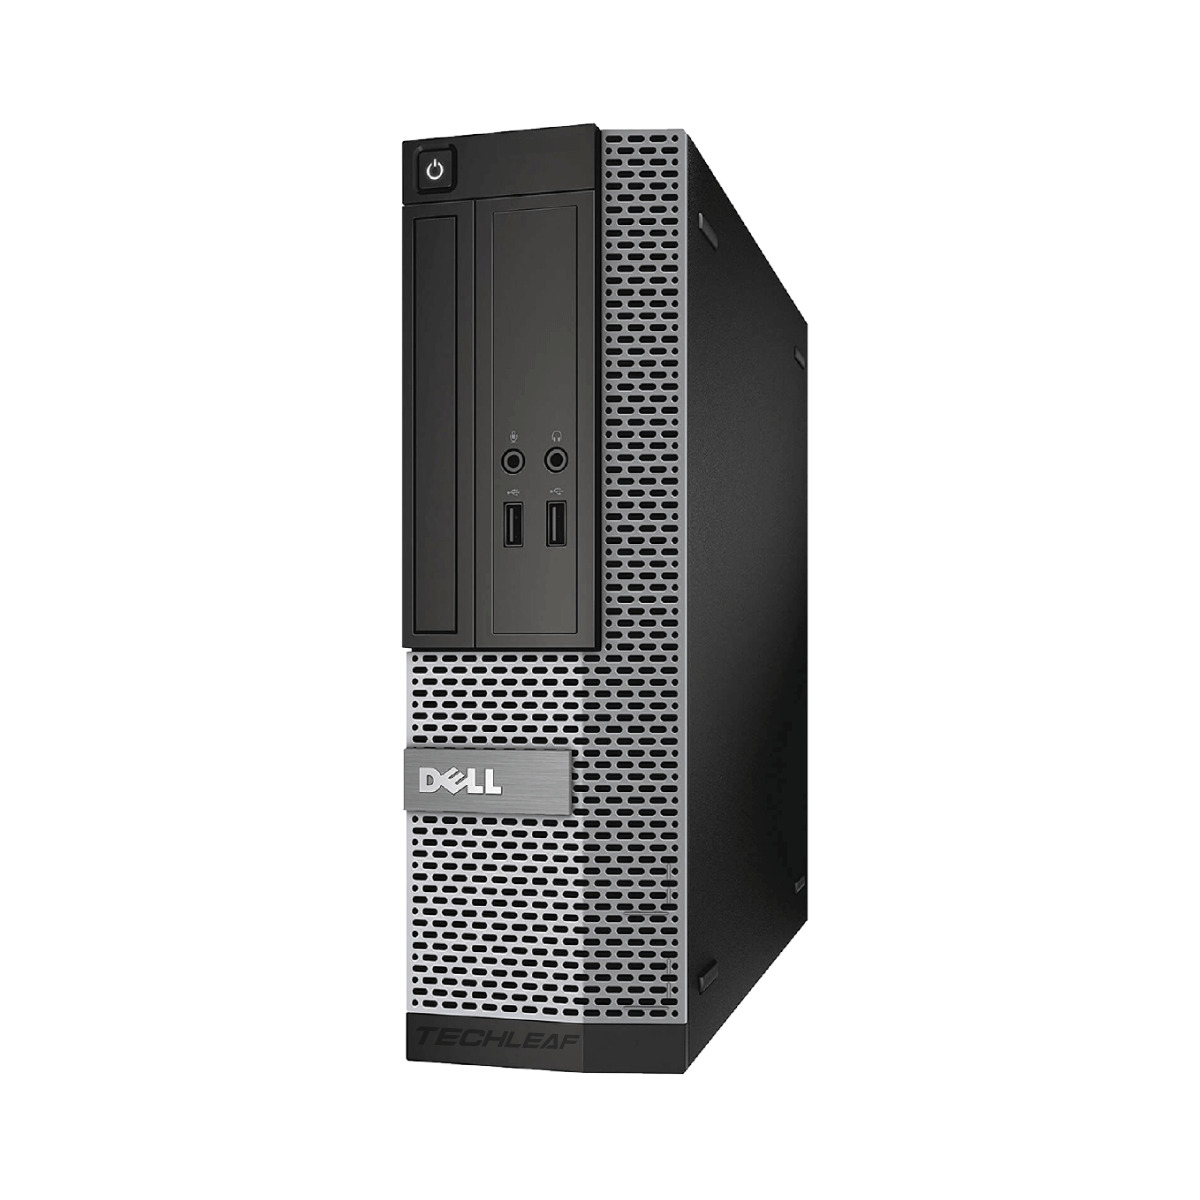 Dell Desktop Computer PC i5, up to 16GB RAM, 4TB SSD, 22